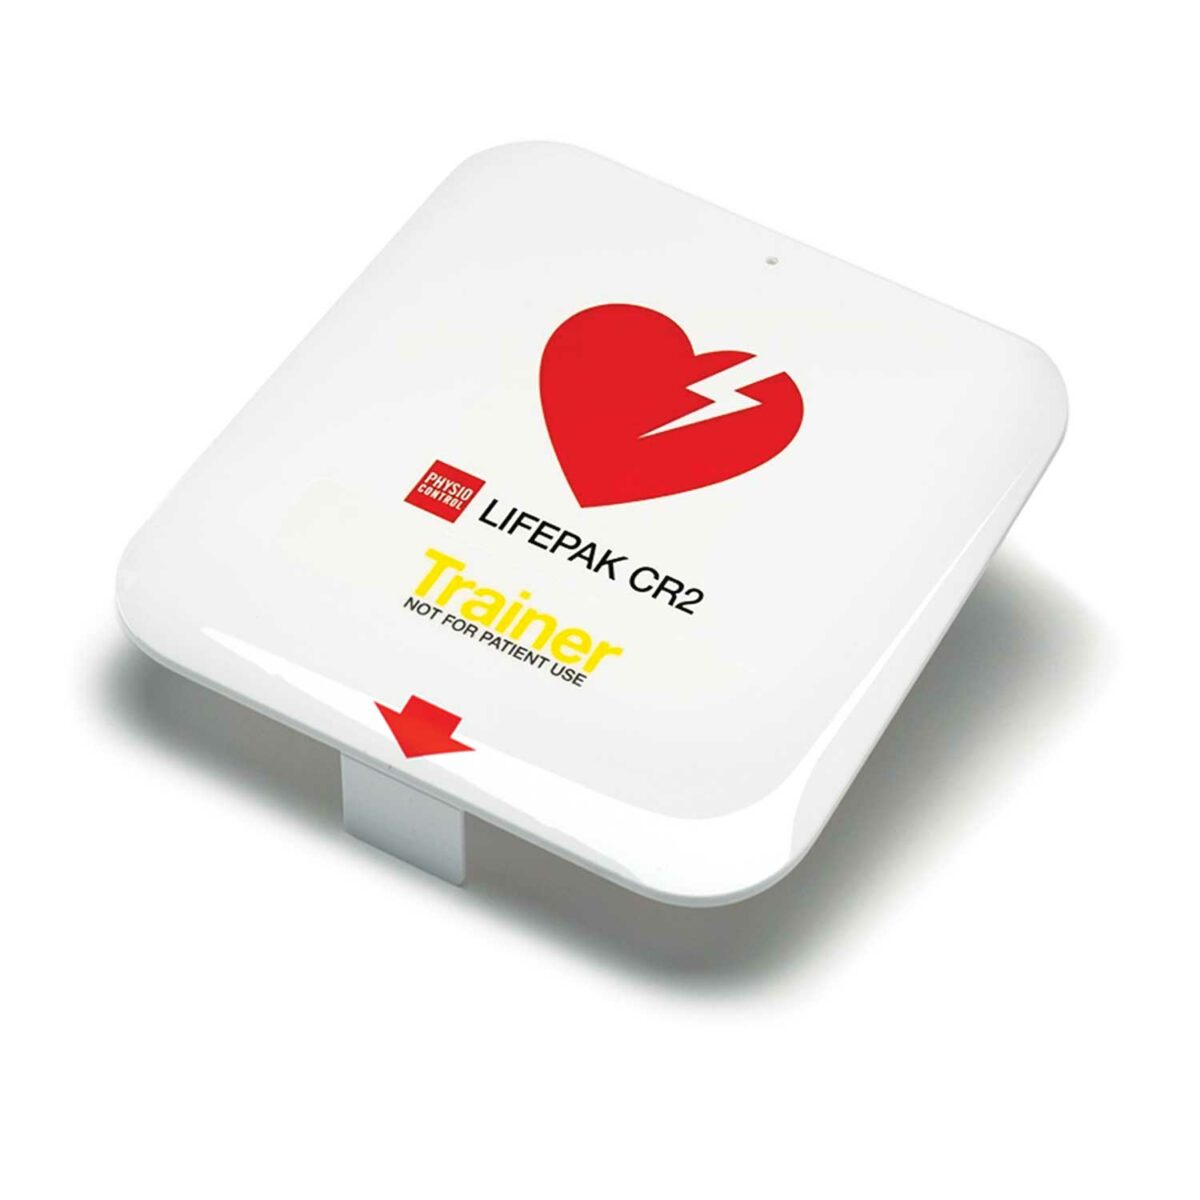 LIFEPAK CR2 AED Trainer Replacement Lid_web